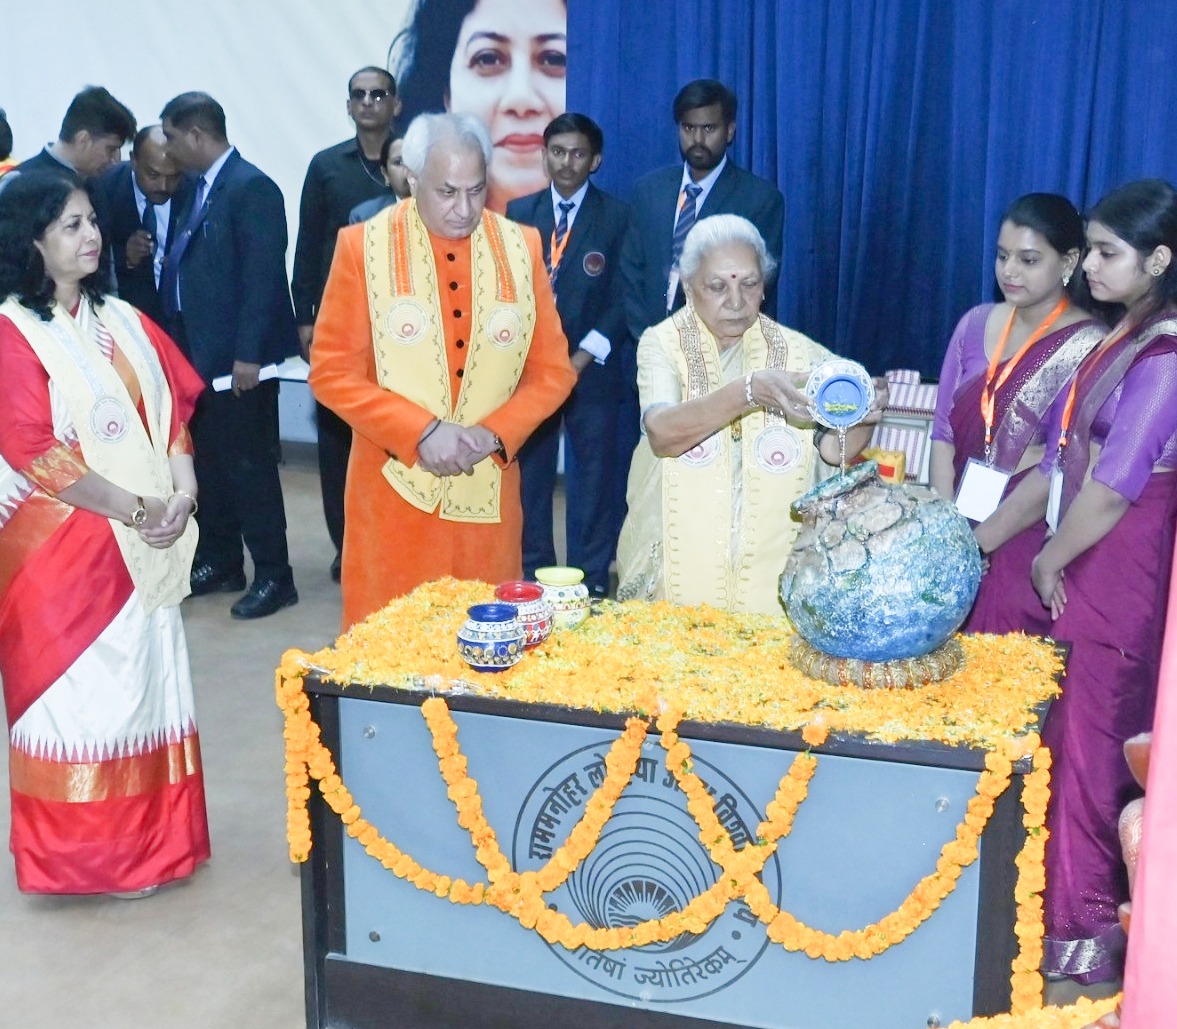 The 28th convocation ceremony of Dr. Ram Manohar Lohia Avadh University, Ayodhya concluded under the chairmanship of the Governor.